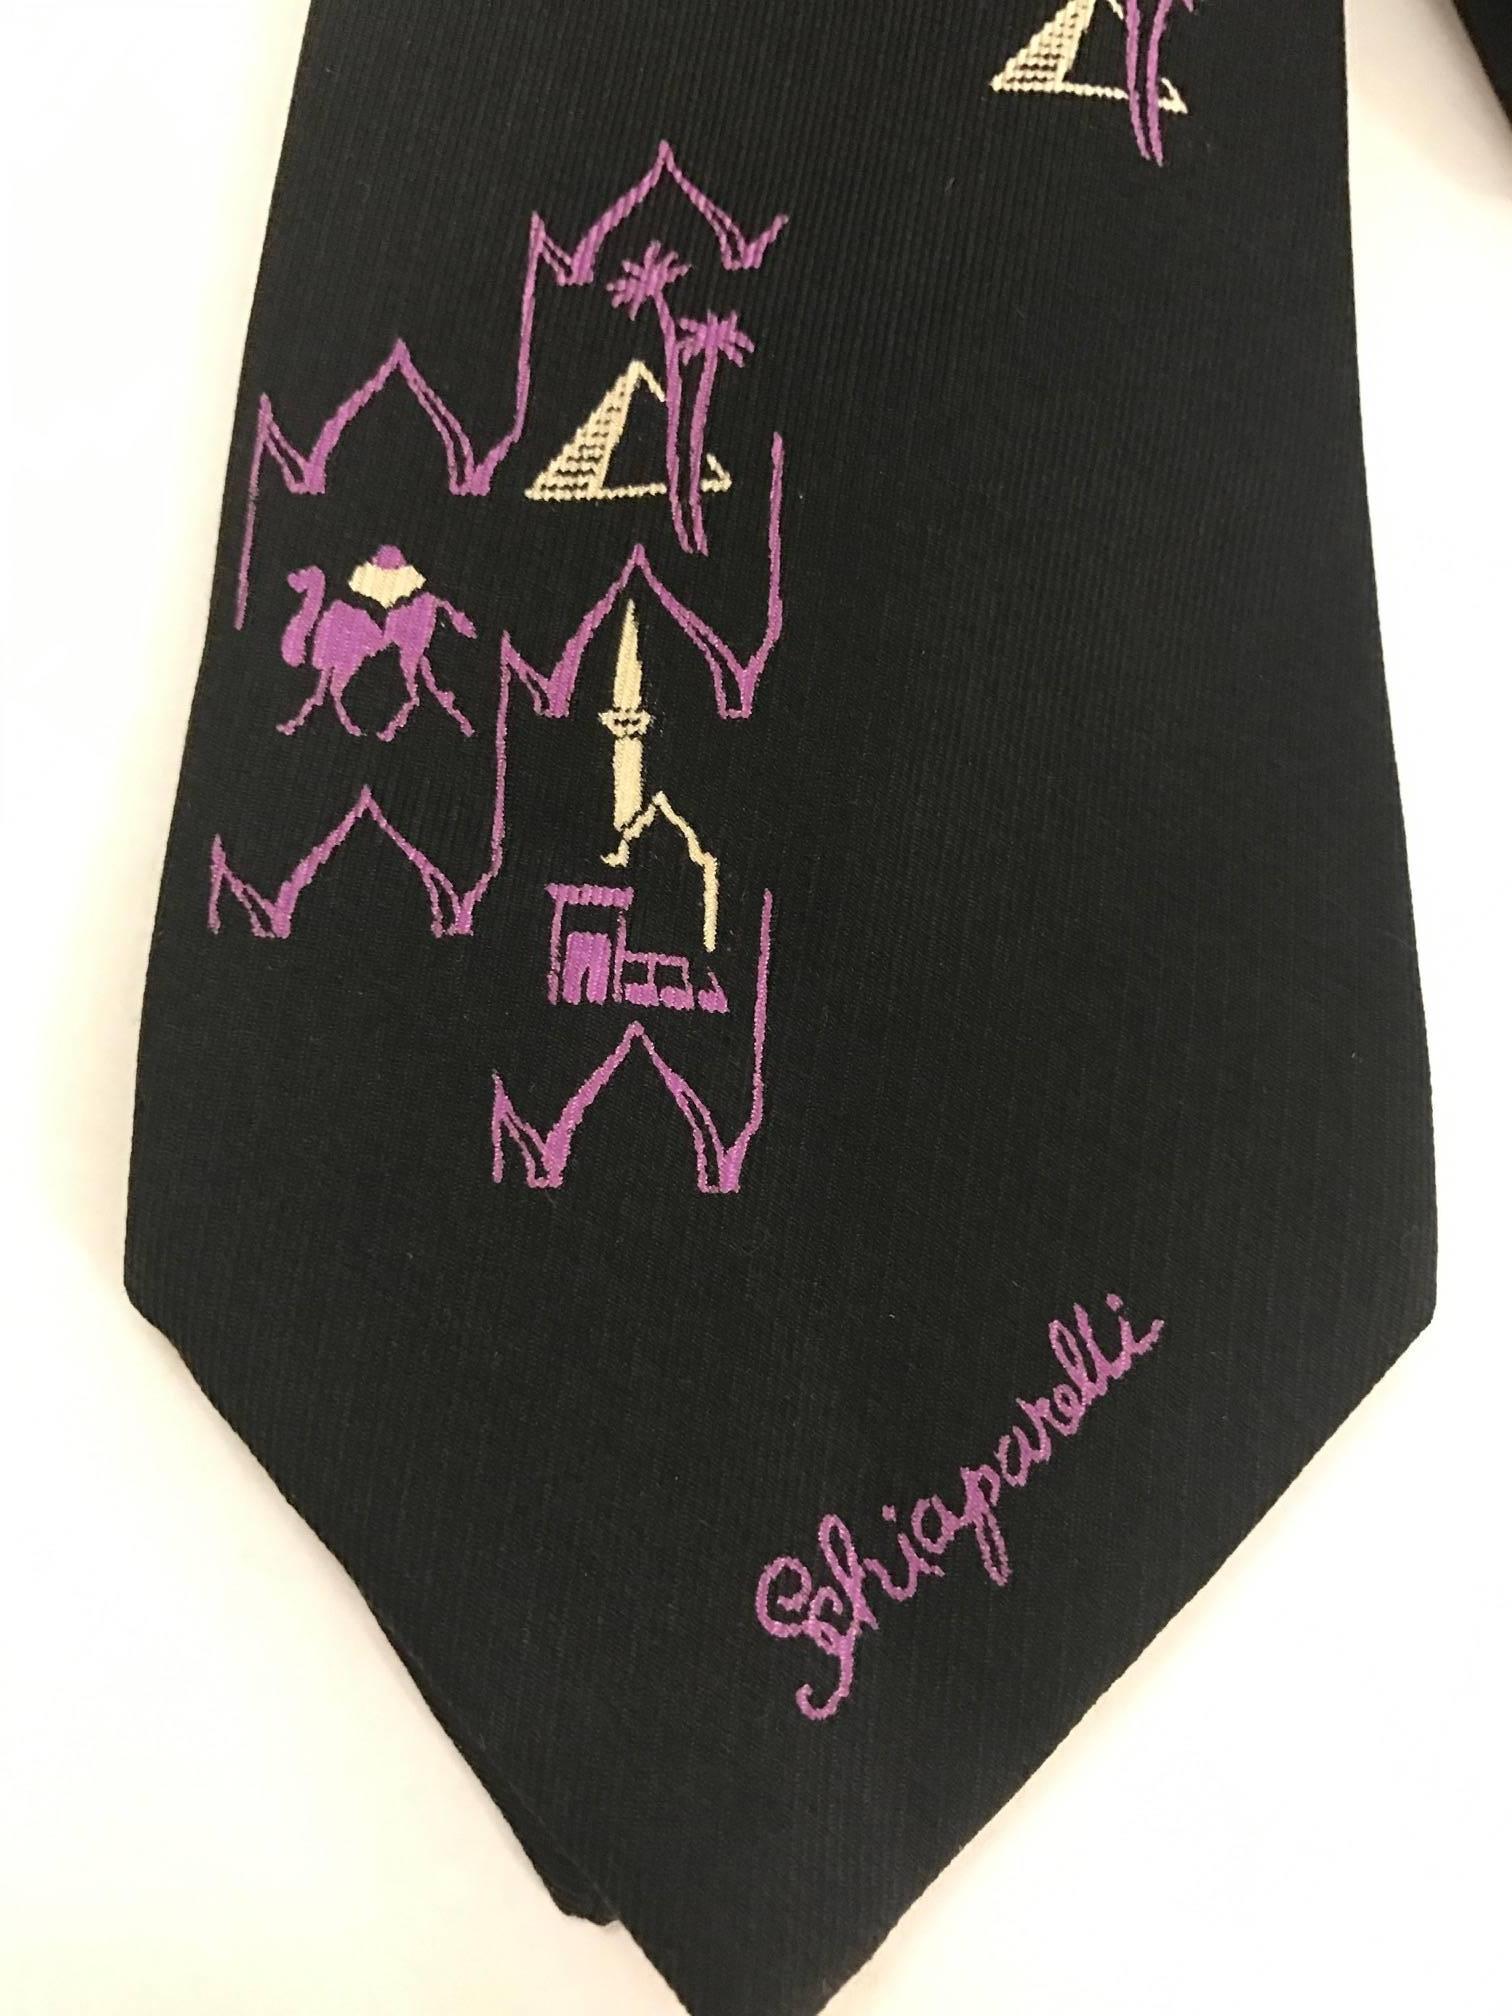 Black neck tie featuring small purple sketches of pyramids, camels, and palm trees. 

Signed 'Schiaparelli' in purple font at bottom front. Unsure of exact decade, but label is from Plum's Inc. boutique in Chicago's legendary Edgewater Beach Hotel,